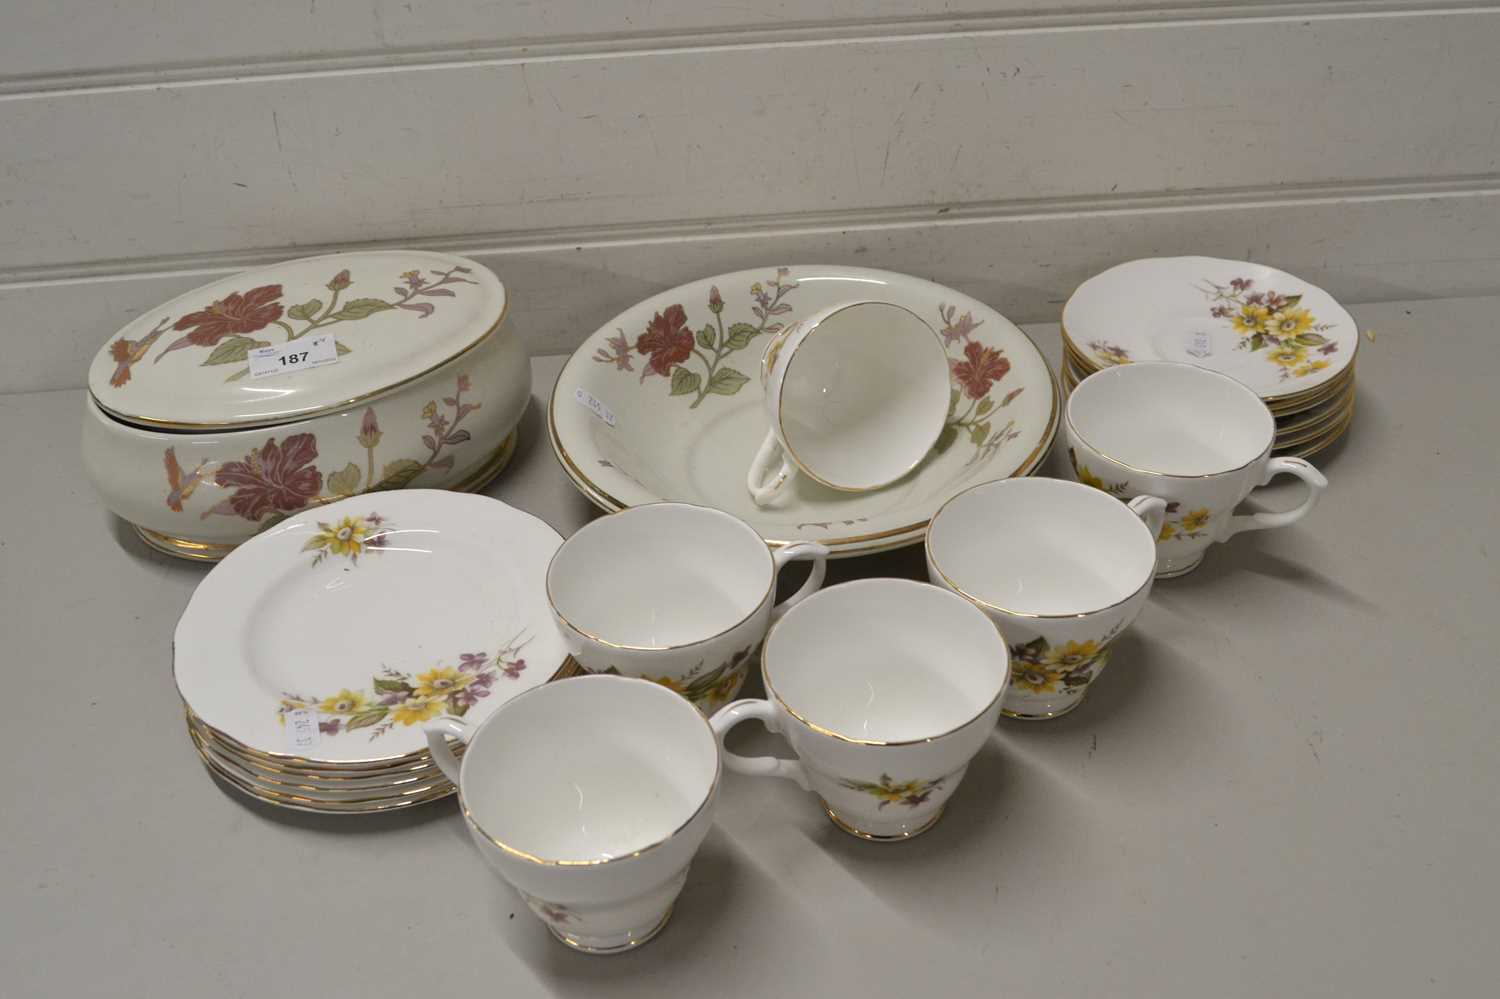 Quantity of various floral decorated table wares